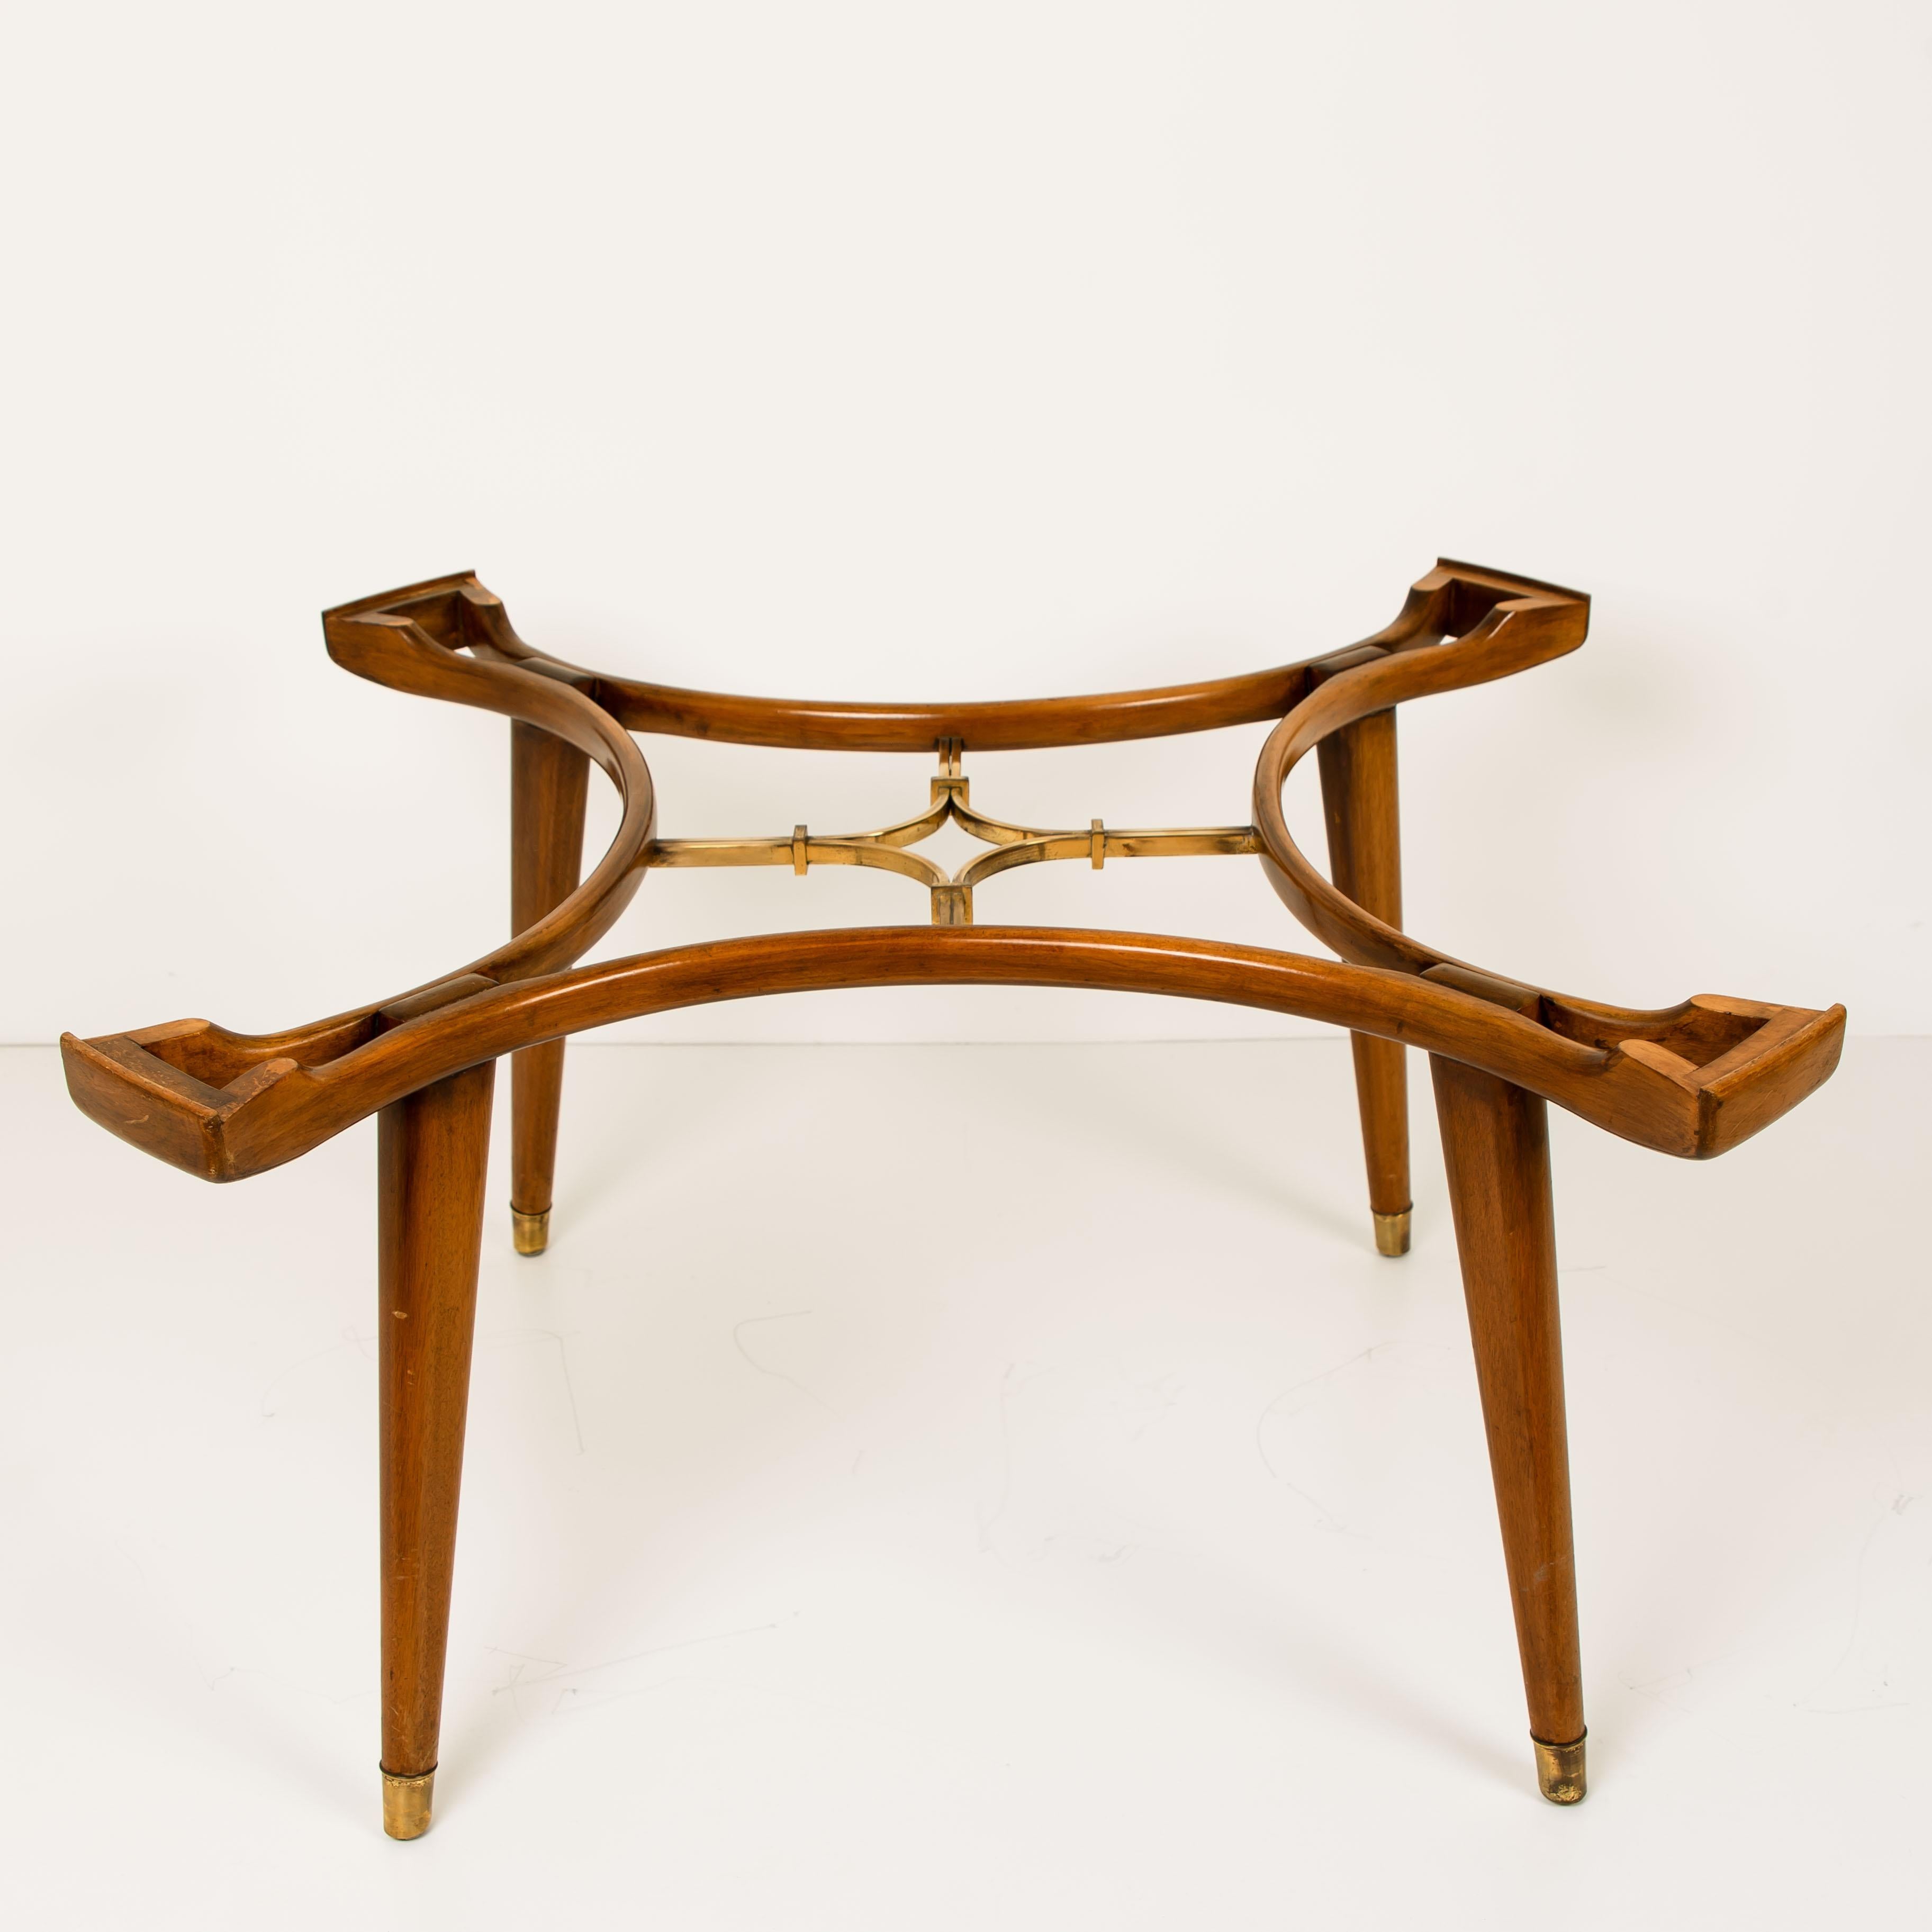 Dutch Solid Brass Walnut Glass Table, by William Watting, Produced by Fristho, 1950s For Sale